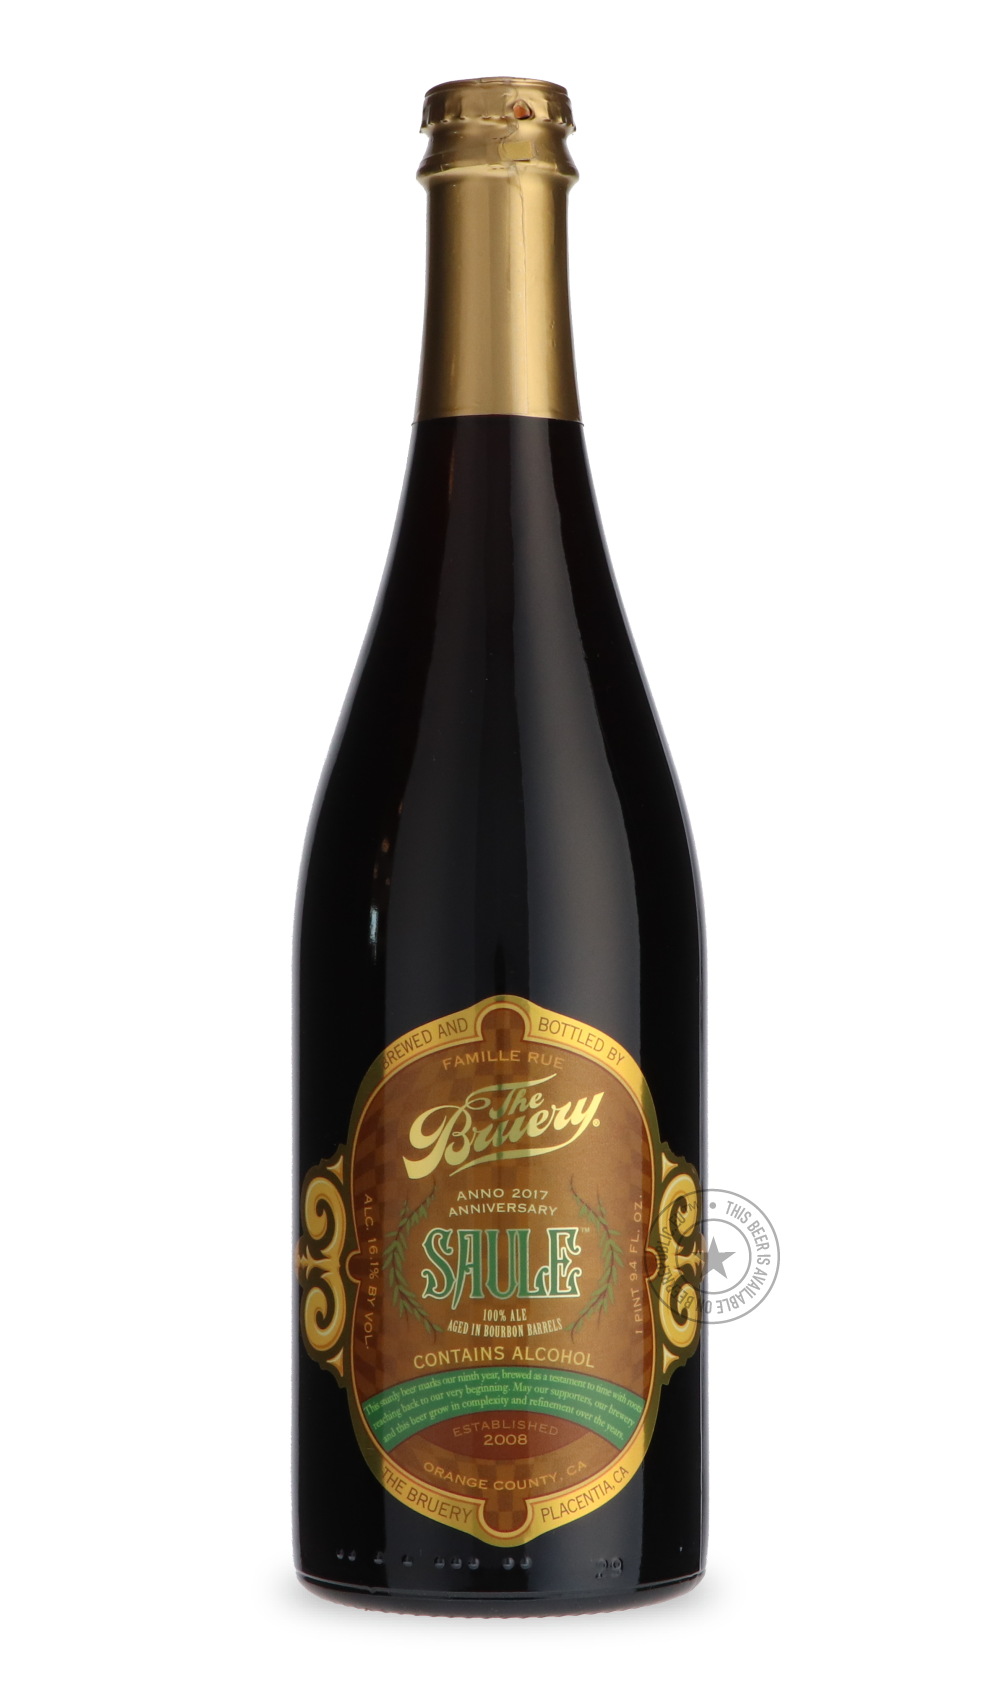 -The Bruery- Saule-Brown & Dark- Only @ Beer Republic - The best online beer store for American & Canadian craft beer - Buy beer online from the USA and Canada - Bier online kopen - Amerikaans bier kopen - Craft beer store - Craft beer kopen - Amerikanisch bier kaufen - Bier online kaufen - Acheter biere online - IPA - Stout - Porter - New England IPA - Hazy IPA - Imperial Stout - Barrel Aged - Barrel Aged Imperial Stout - Brown - Dark beer - Blond - Blonde - Pilsner - Lager - Wheat - Weizen - Amber - Barle